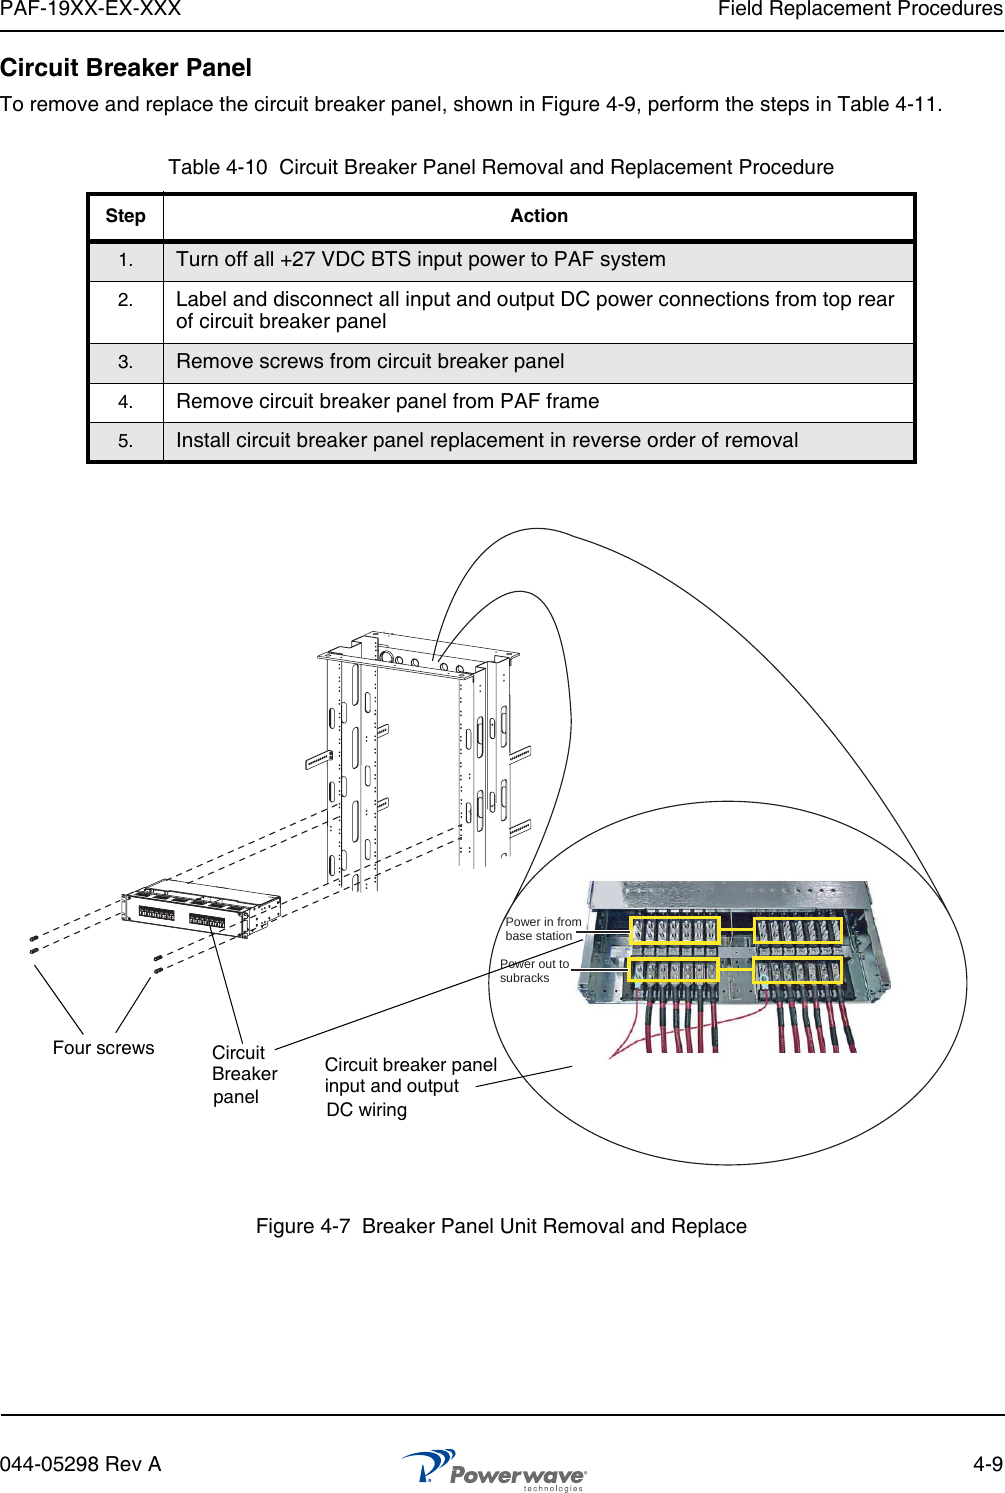 PAF-19XX-EX-XXX Field Replacement Procedures044-05298 Rev A 4-9Circuit Breaker PanelTo remove and replace the circuit breaker panel, shown in Figure 4-9, perform the steps in Table 4-11. Figure 4-7  Breaker Panel Unit Removal and ReplaceTable 4-10  Circuit Breaker Panel Removal and Replacement ProcedureStep Action1. Turn off all +27 VDC BTS input power to PAF system2. Label and disconnect all input and output DC power connections from top rear of circuit breaker panel3. Remove screws from circuit breaker panel4. Remove circuit breaker panel from PAF frame5. Install circuit breaker panel replacement in reverse order of removalPower in from base stationPower out tosubracksCircuit breaker panelinput and outputDC wiringCircuit Four screwspanelBreaker 